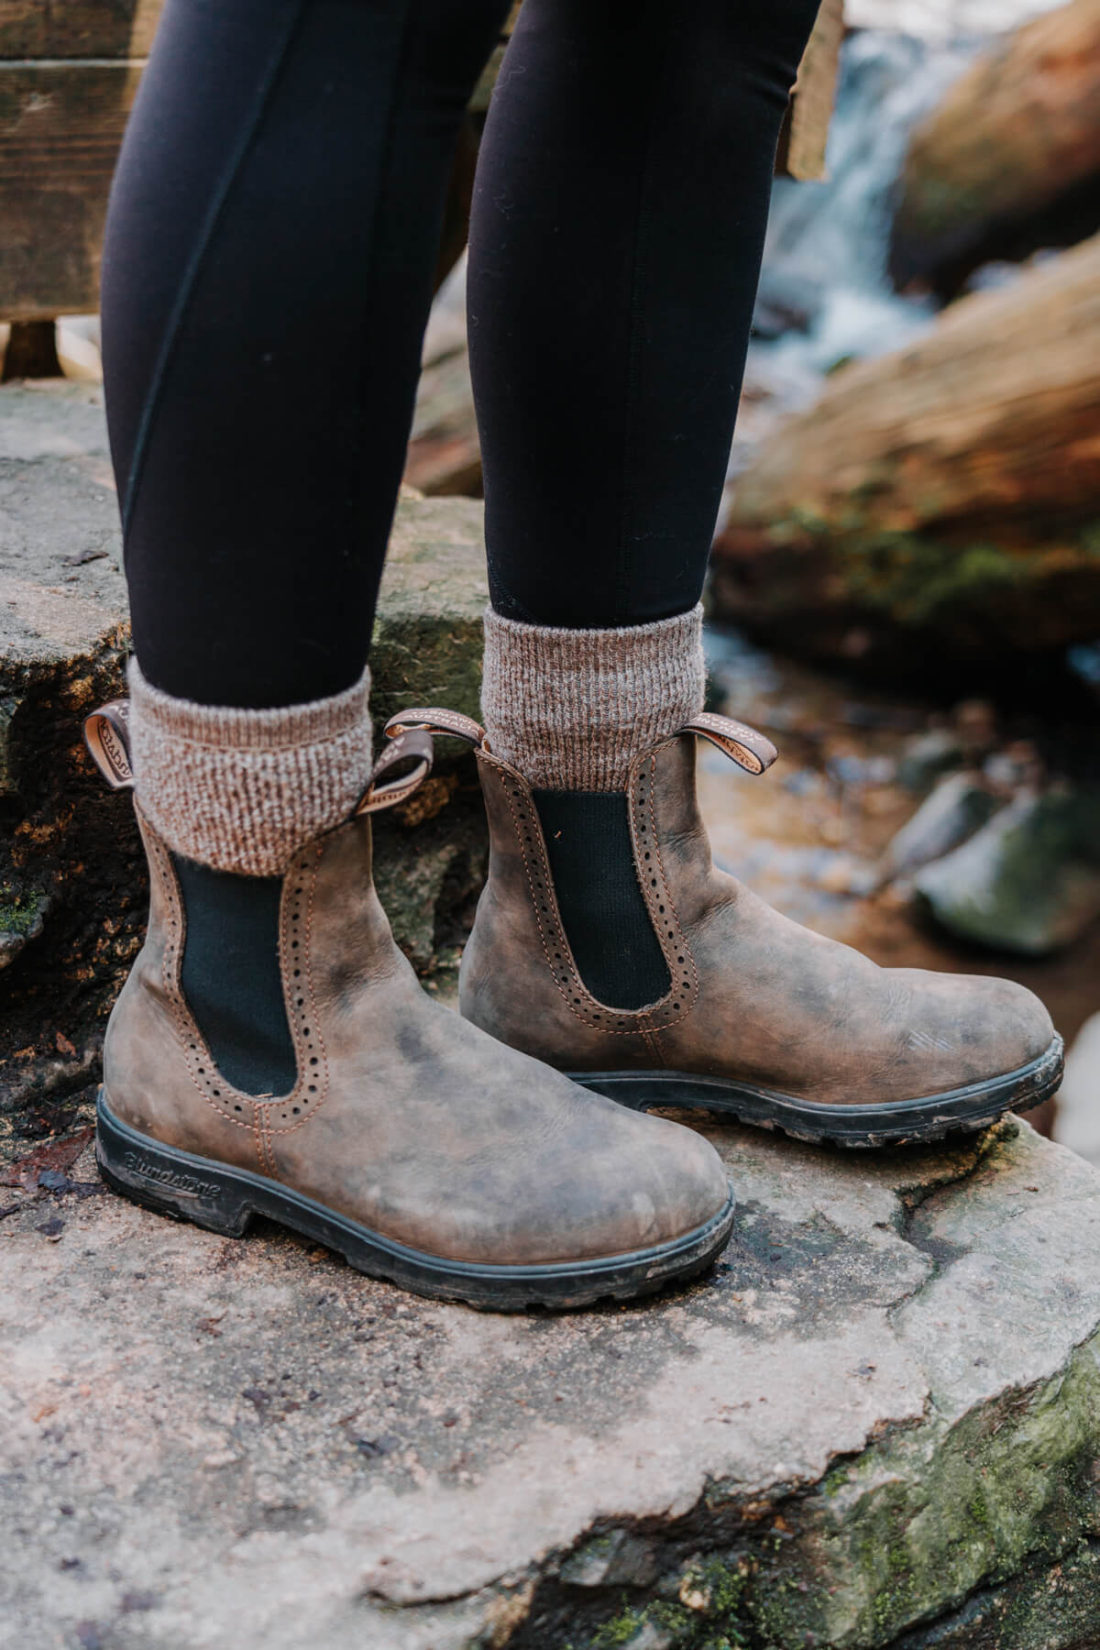 Are Blundstones Good for Walking Long Distances?